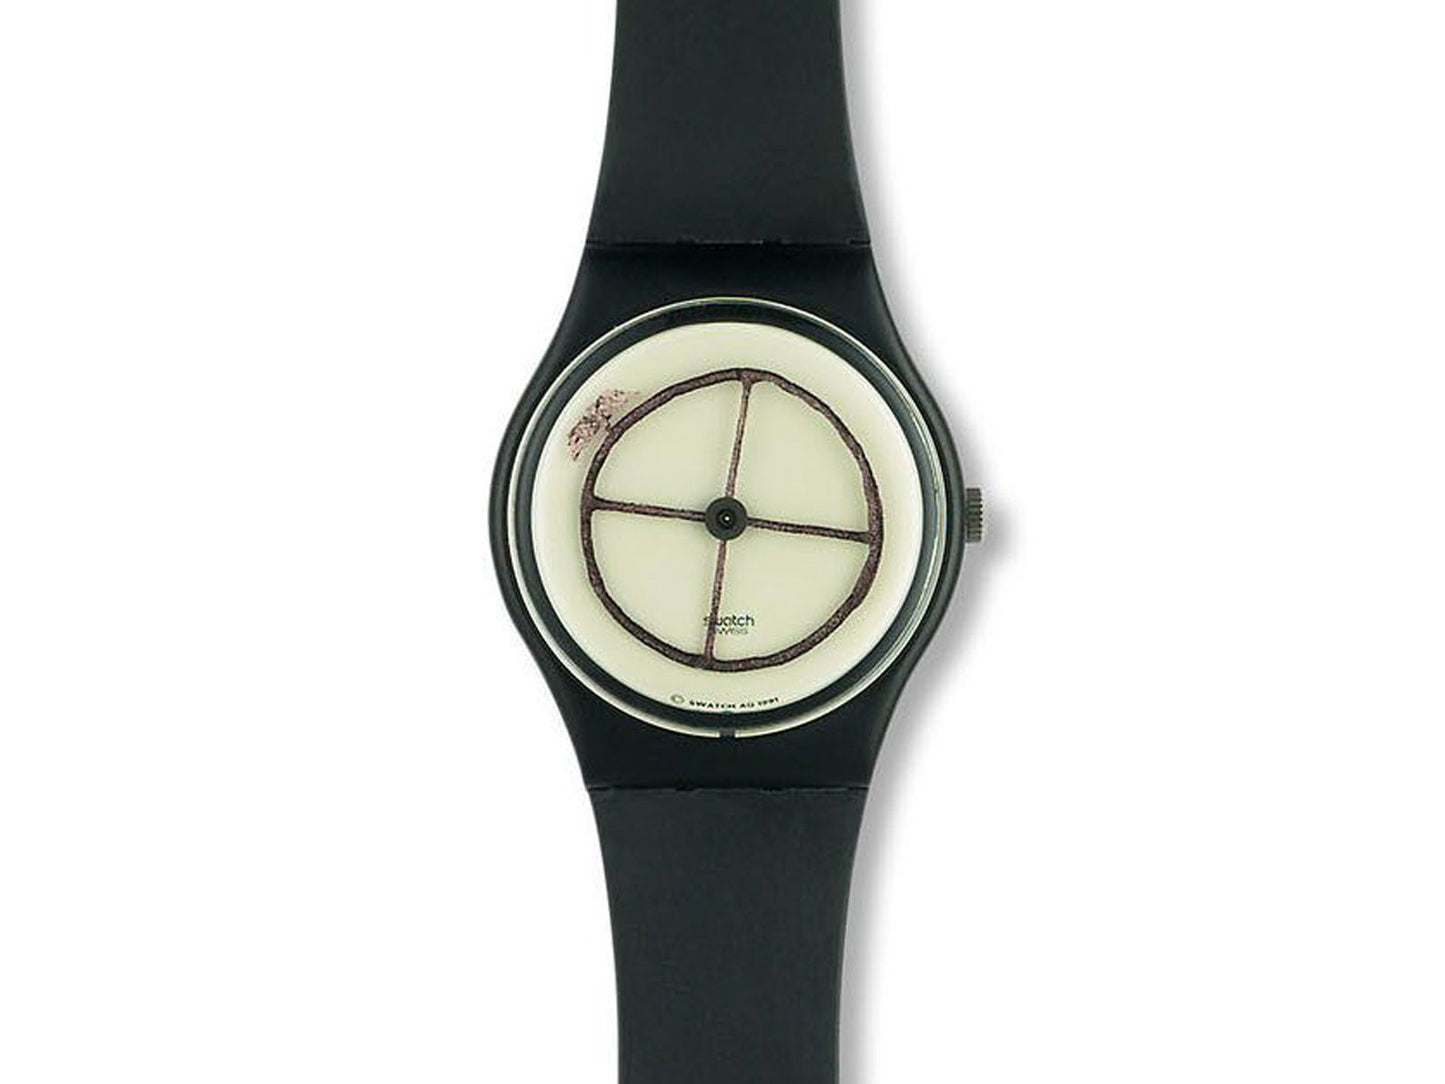 Swatch WHEEL ANIMAL / Gent (GZ120) / Swiss Art - Numbered Edition - New Old Stock - with Original Box